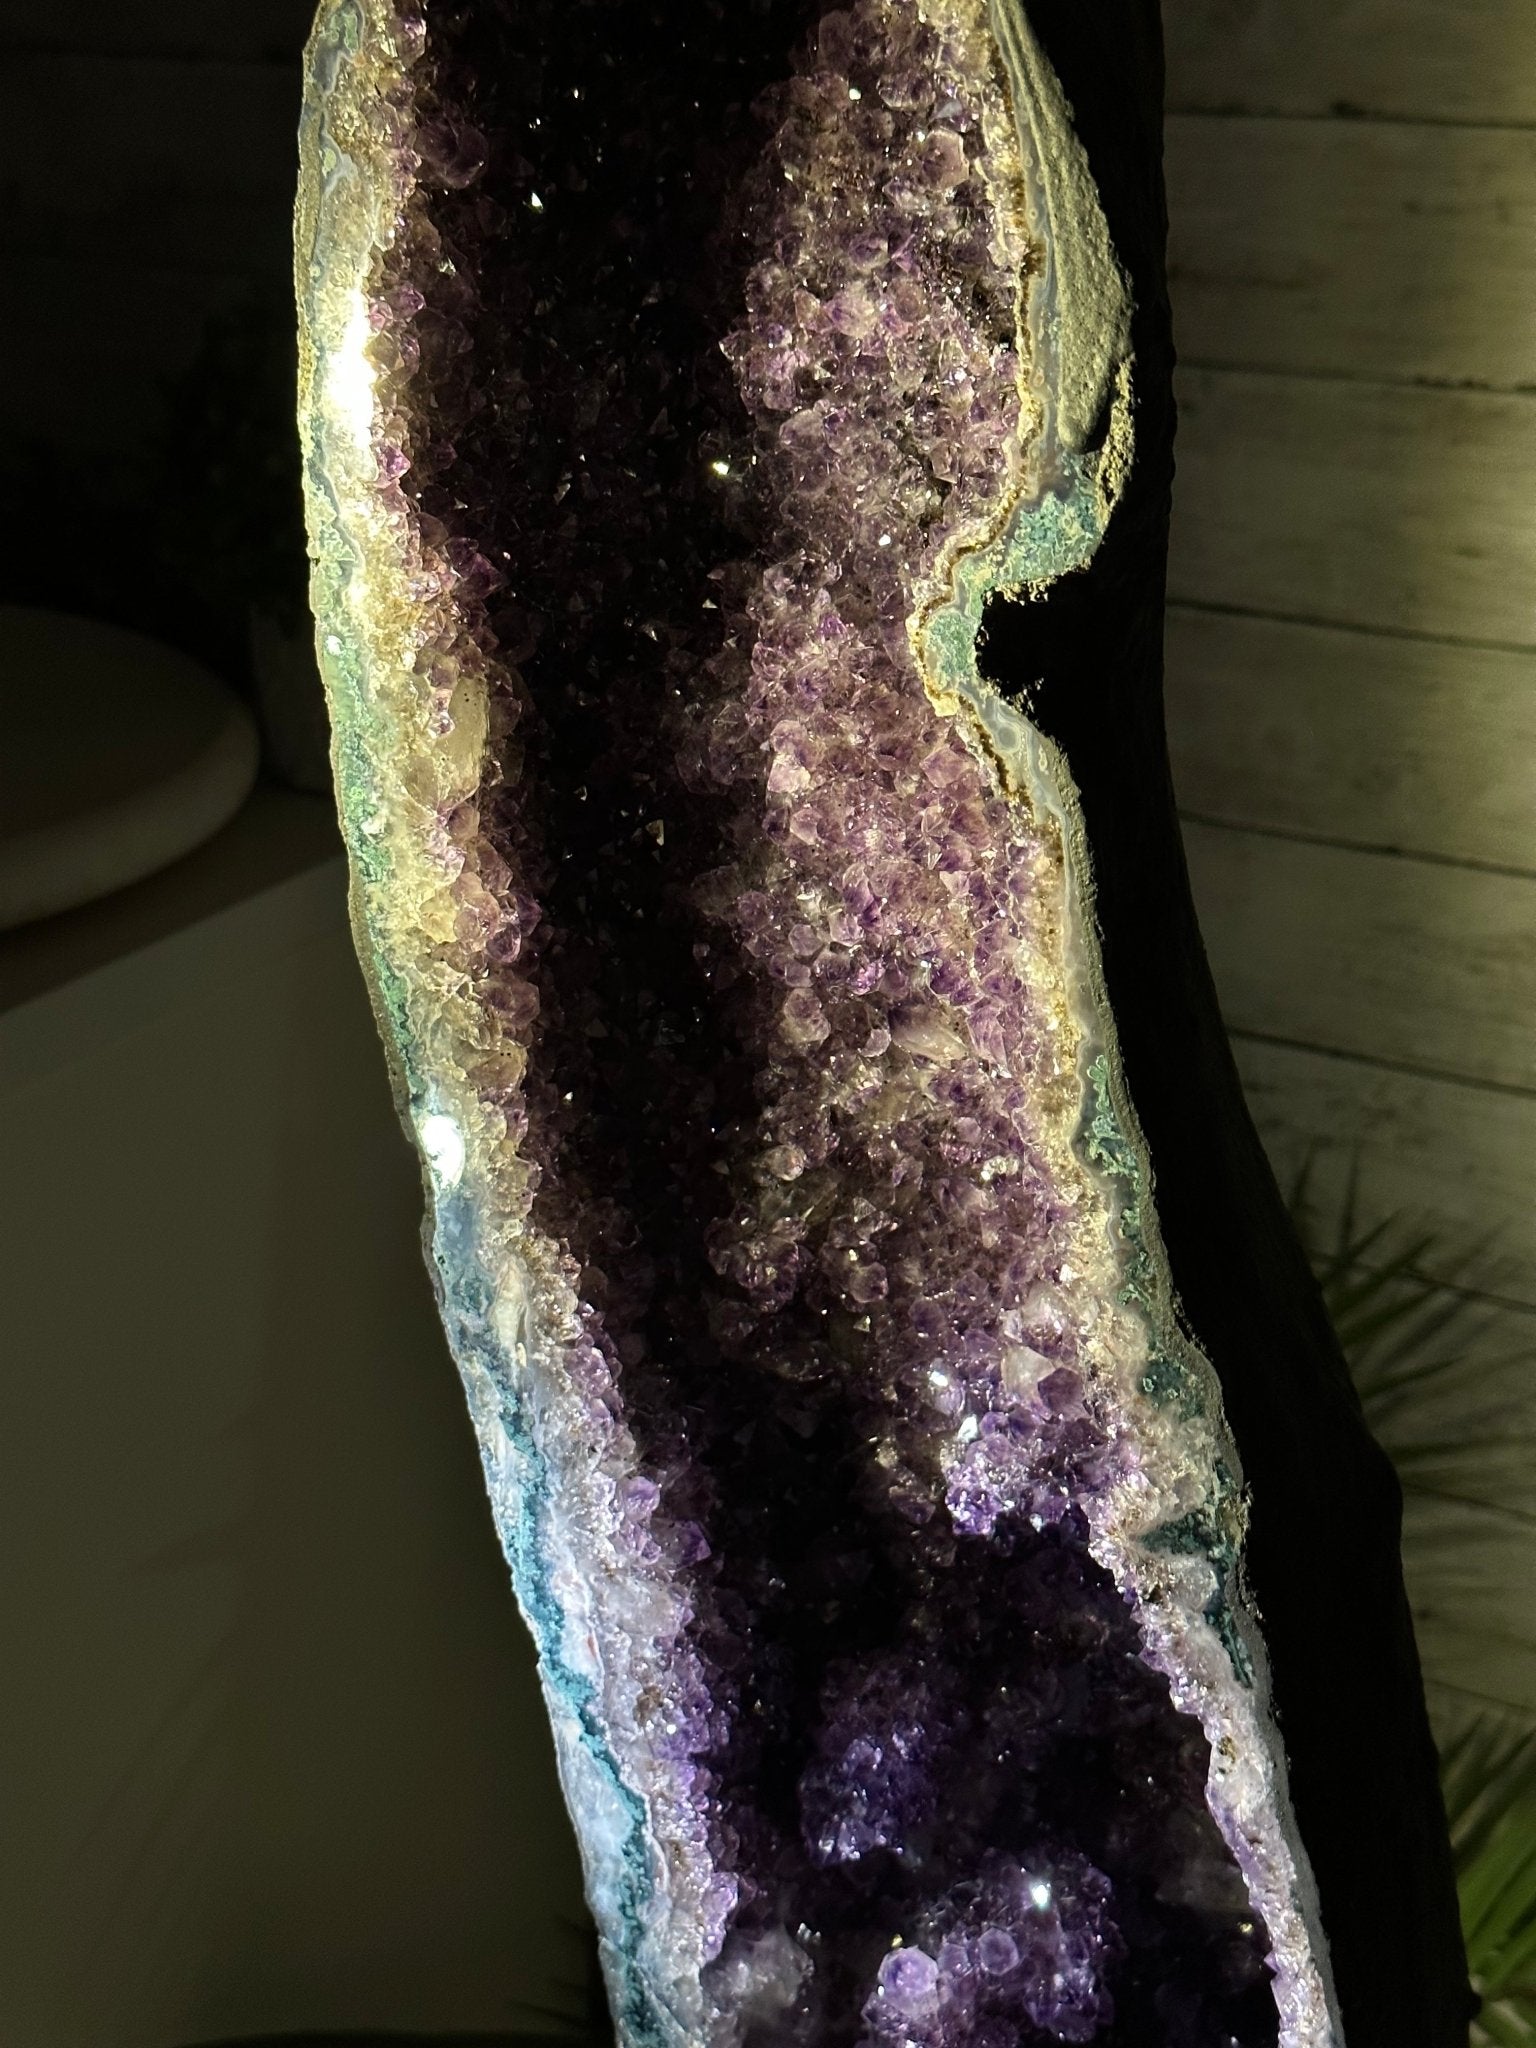 Extra Quality Brazilian Amethyst Cathedral, 100.7 lbs & 45.8" Tall, Model #5601-1234 by Brazil Gems - Brazil GemsBrazil GemsExtra Quality Brazilian Amethyst Cathedral, 100.7 lbs & 45.8" Tall, Model #5601-1234 by Brazil GemsCathedrals5601-1234